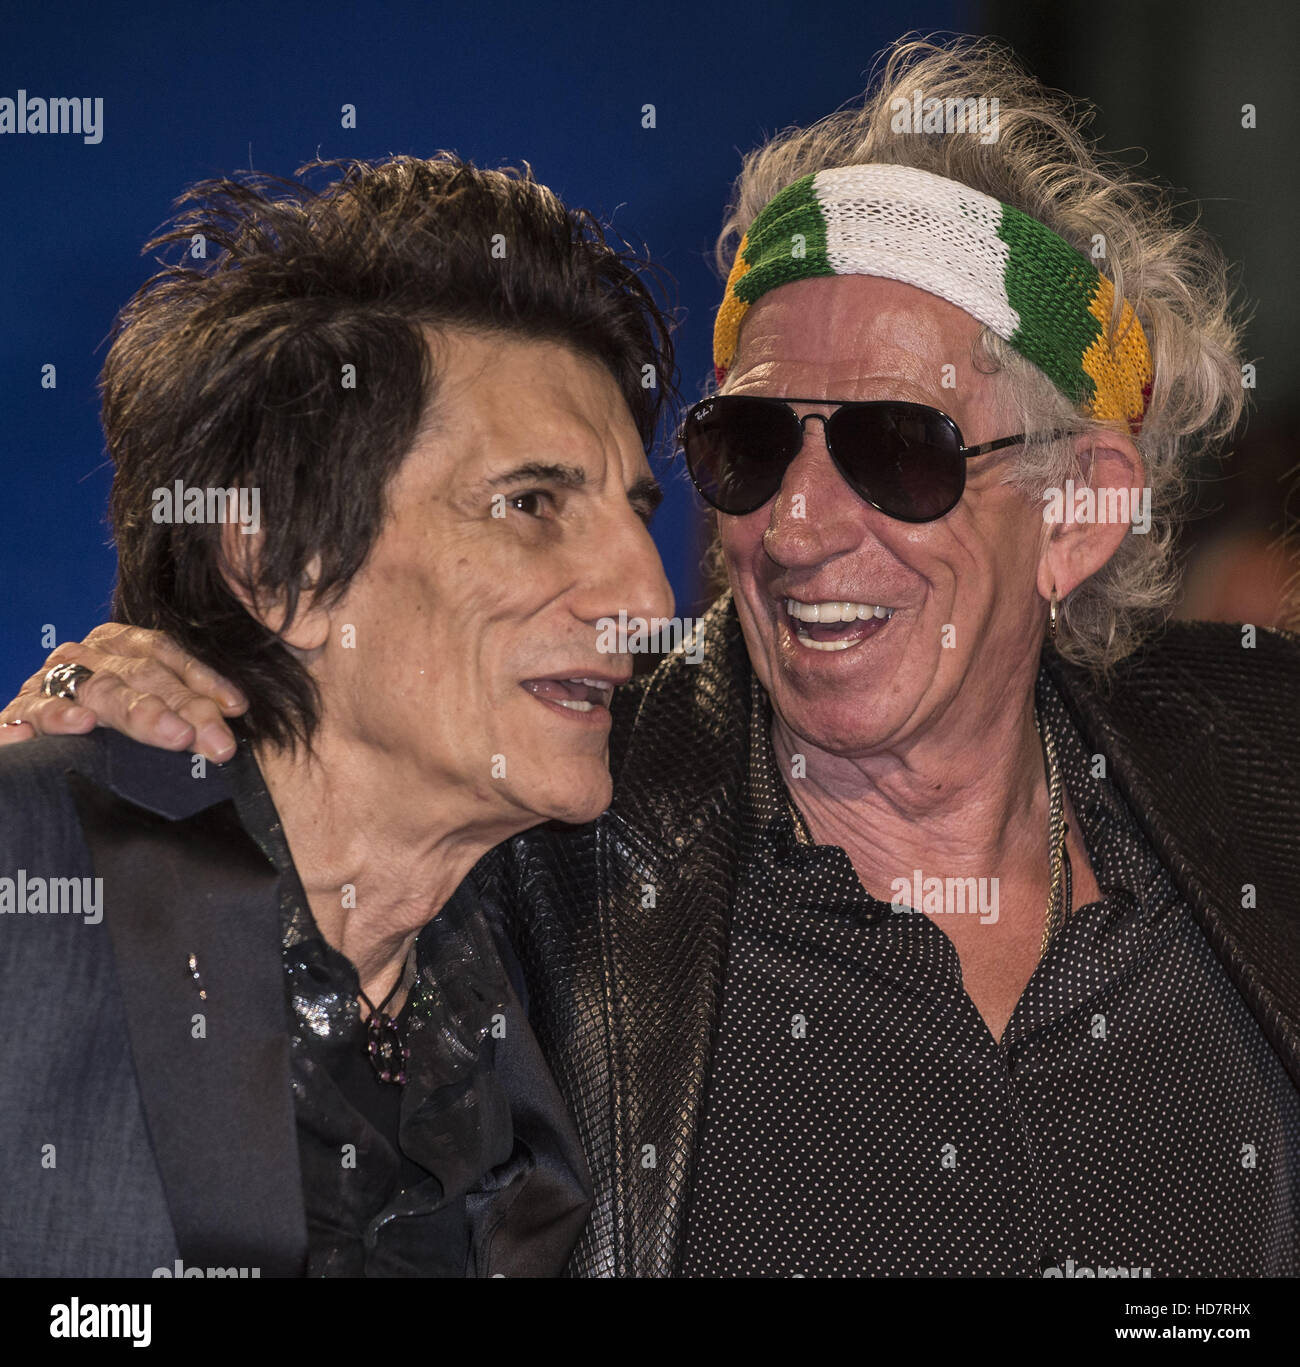 Celebrities attends the premiere for "The Rolling Stones Ole Ole Stock  Photo - Alamy